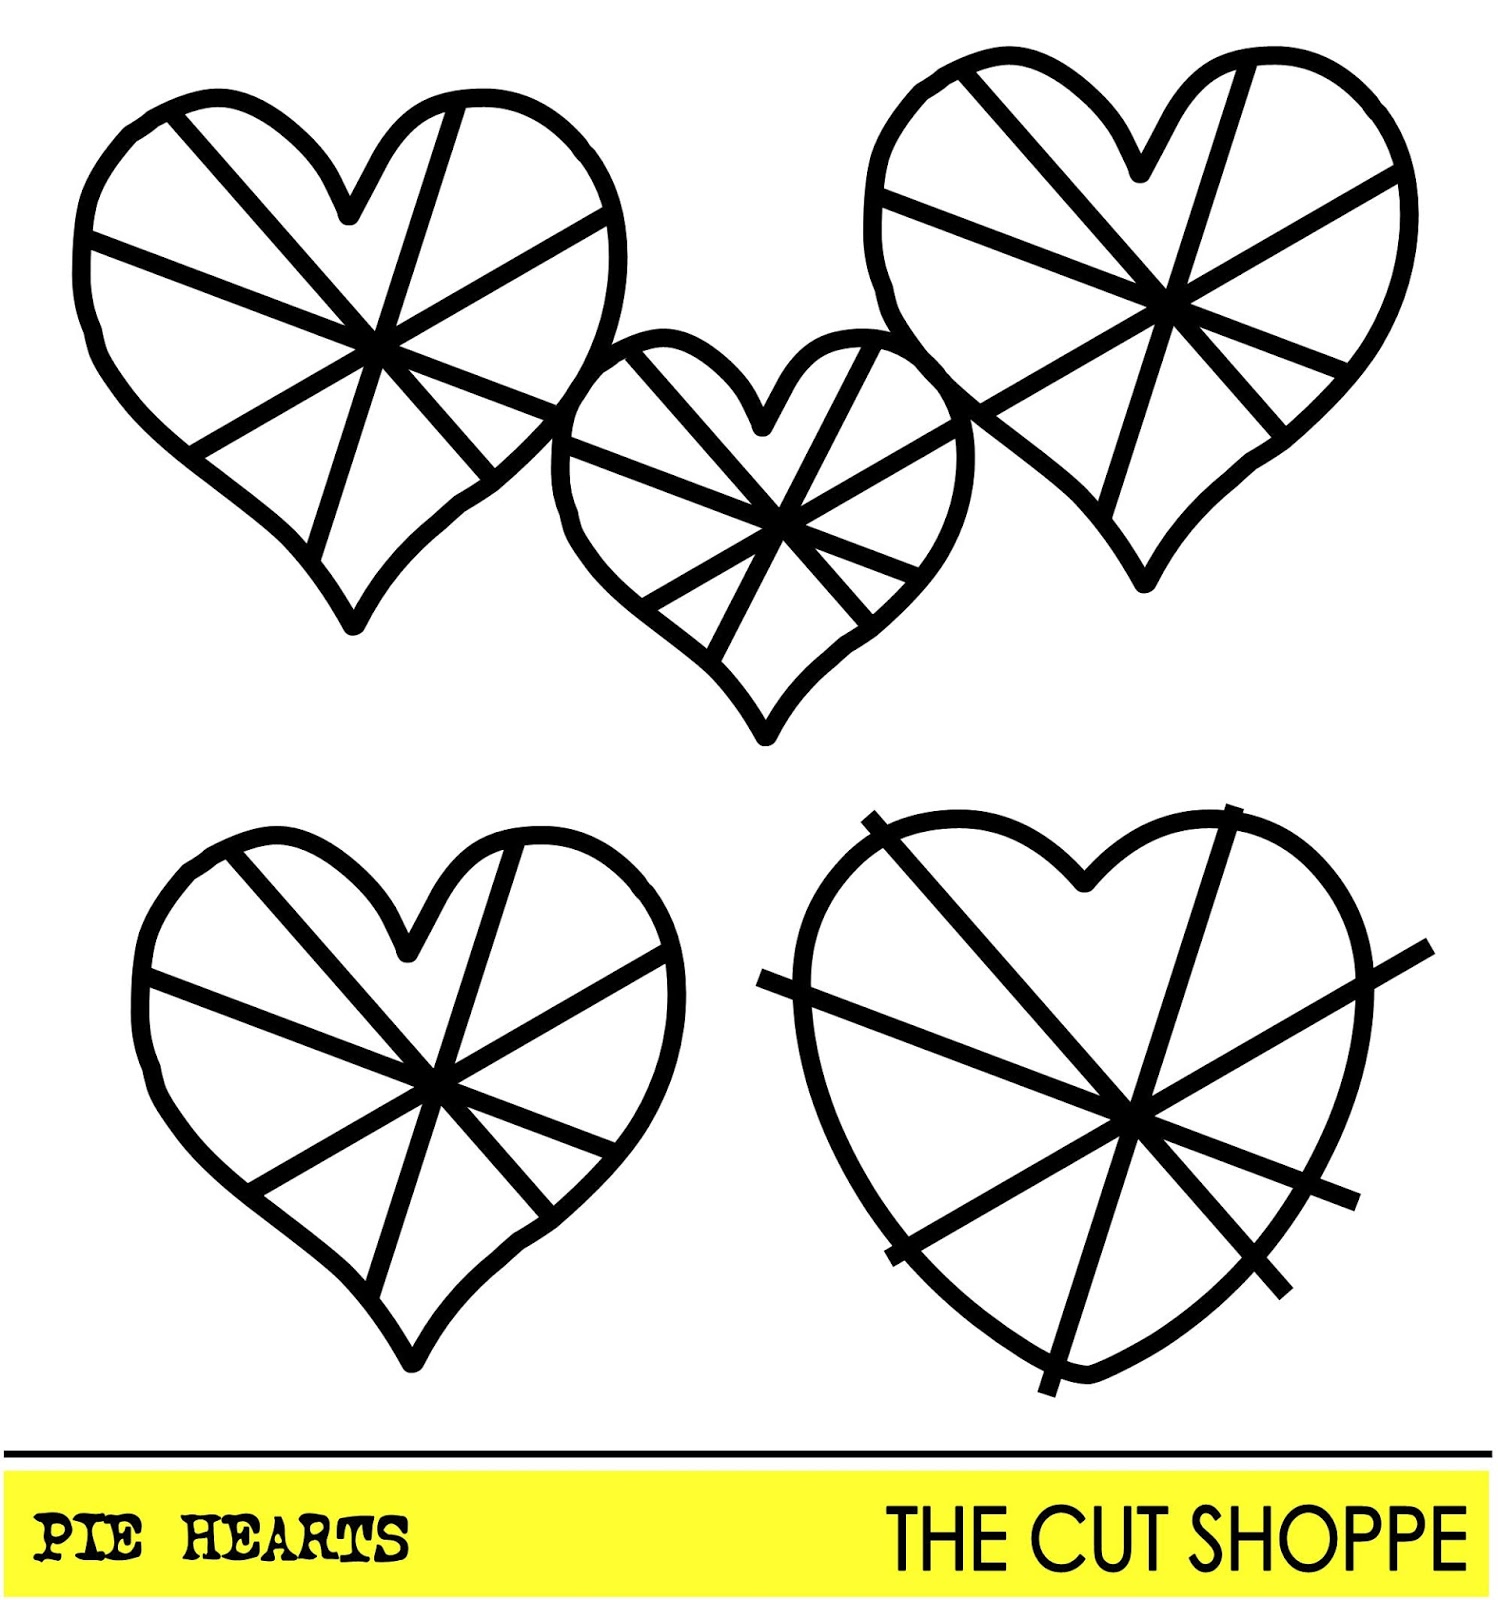 https://www.etsy.com/listing/193530389/the-pie-hearts-cut-file-consists-of?ref=shop_home_active_1